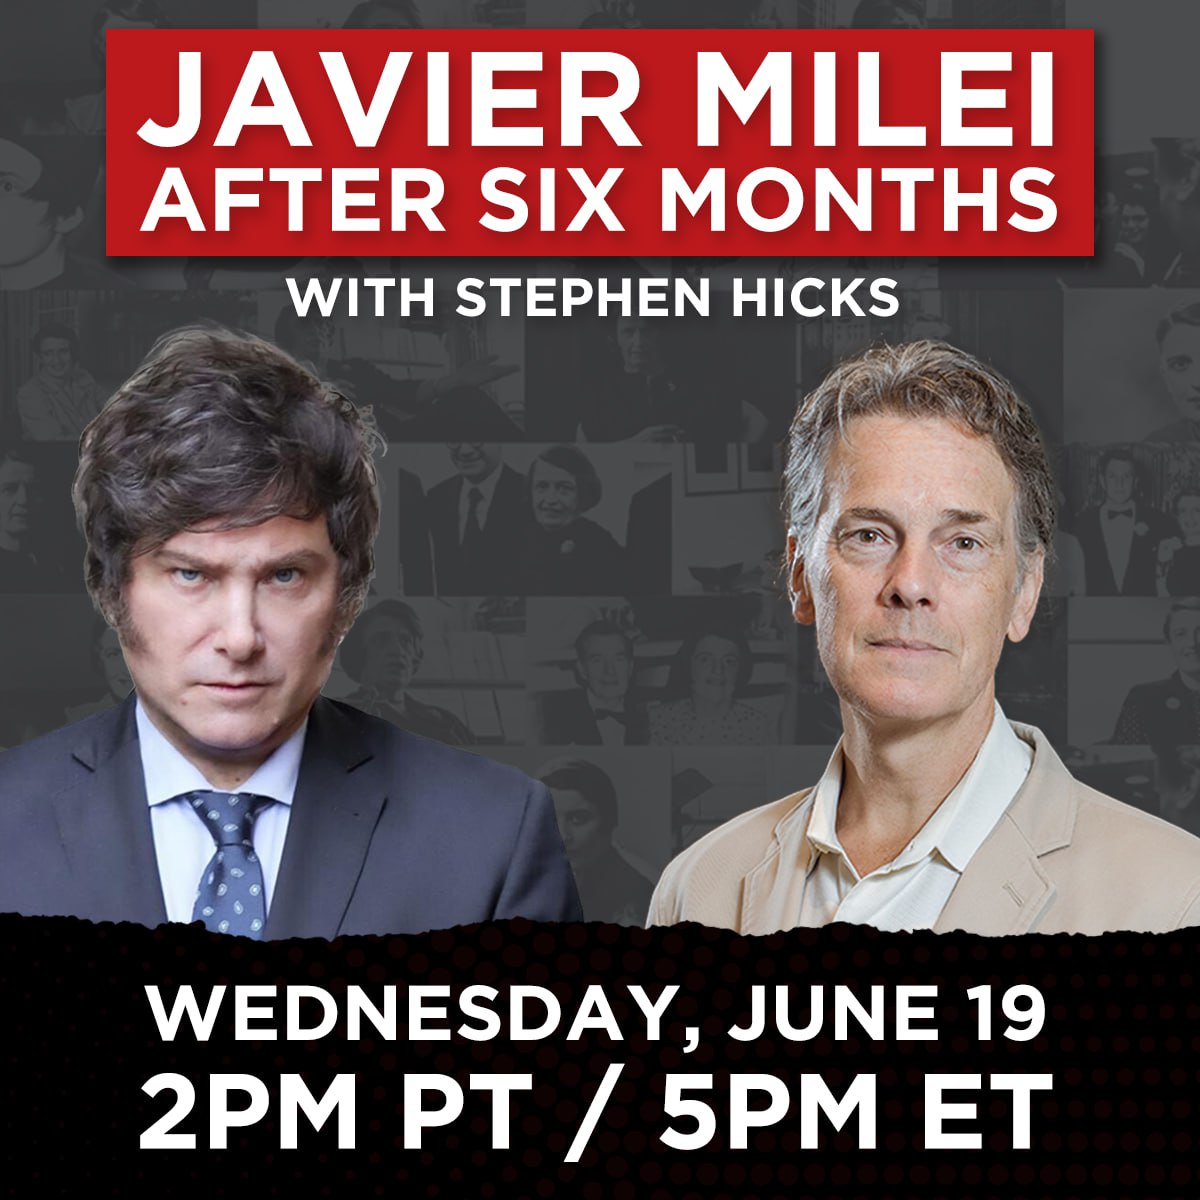 Javier Milei After Six Months: Current Events with Stephen Hicks